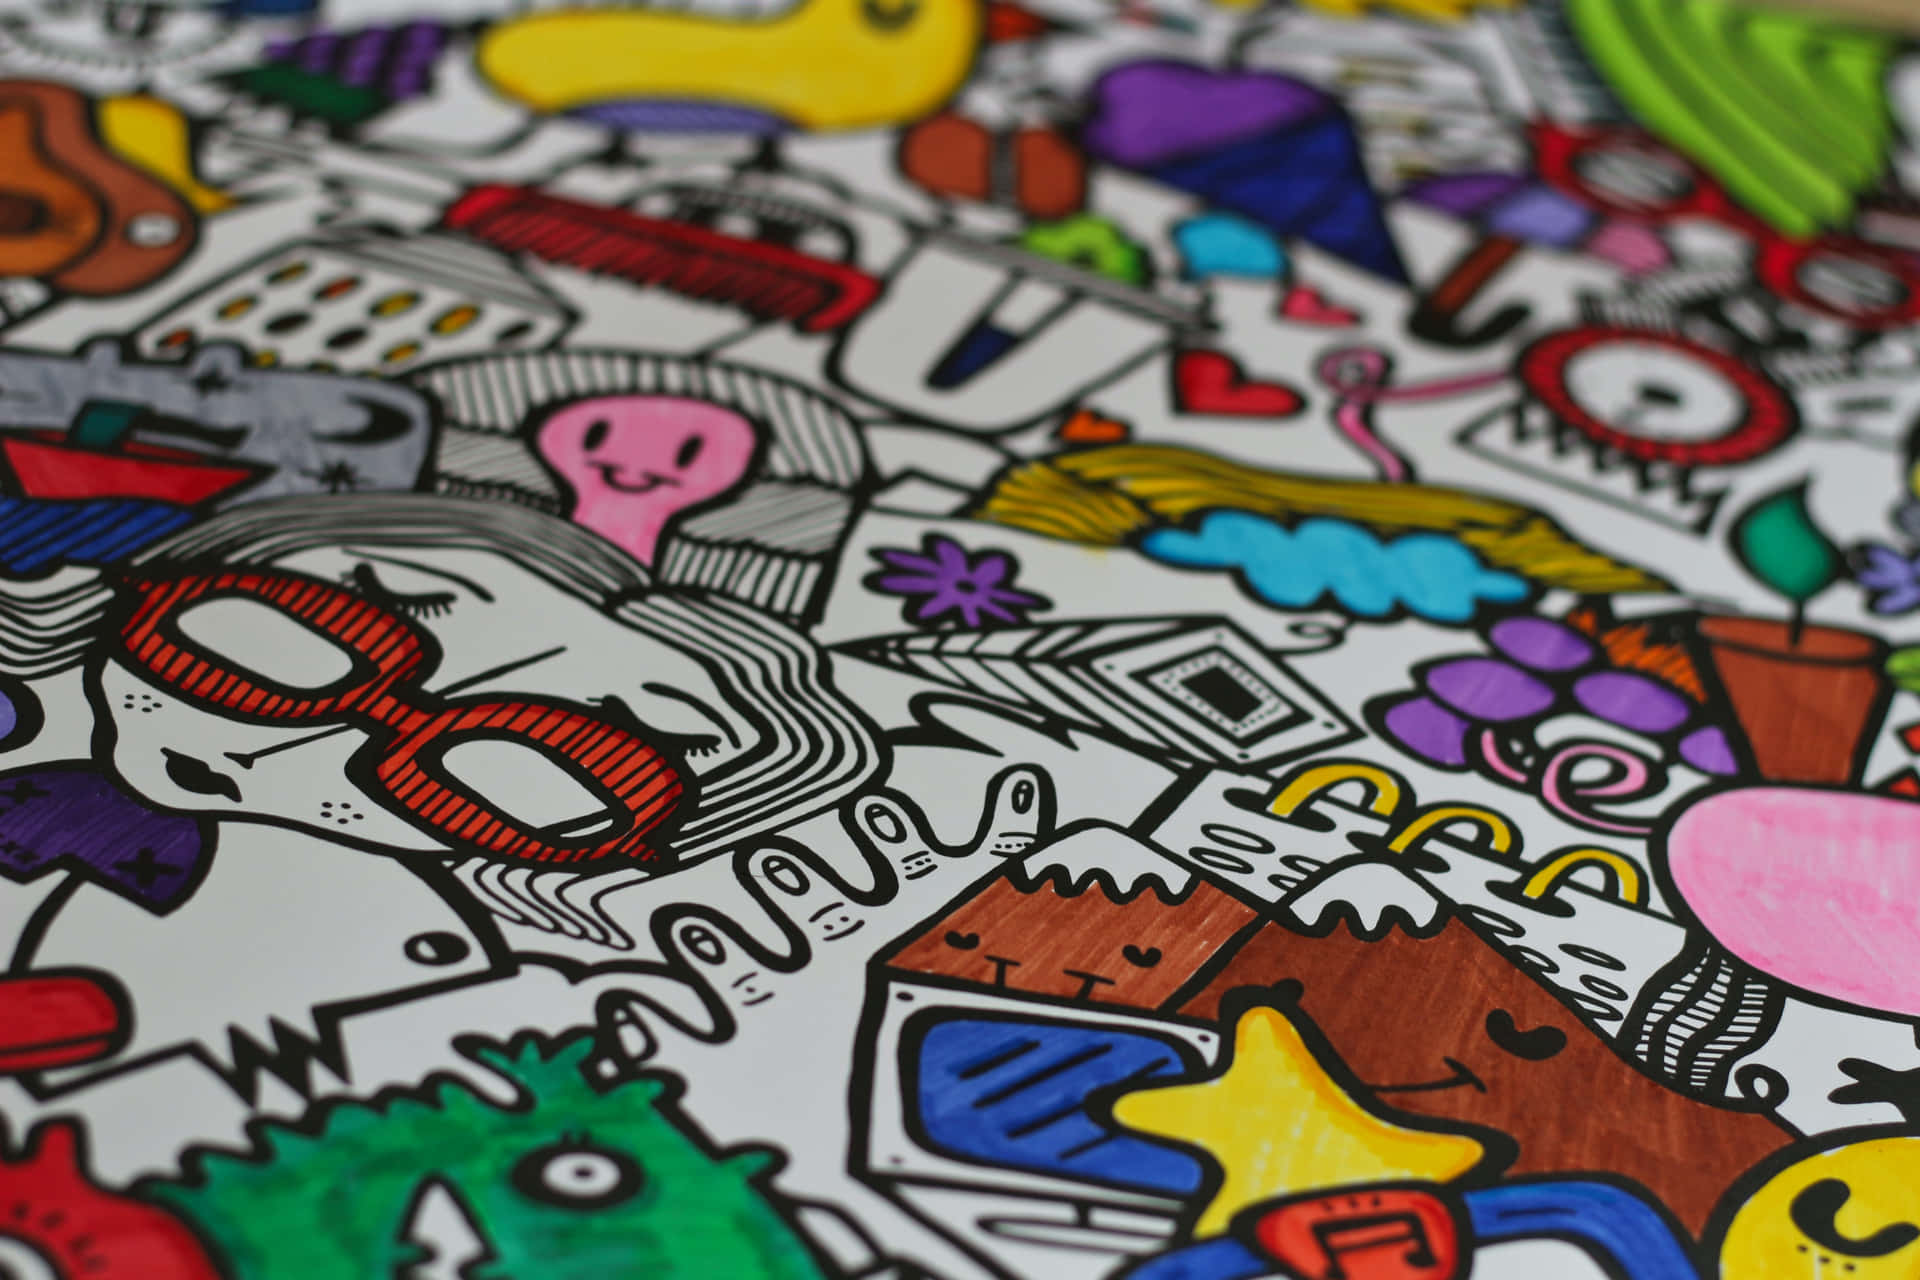 Express your creativity and explore with Doodling!